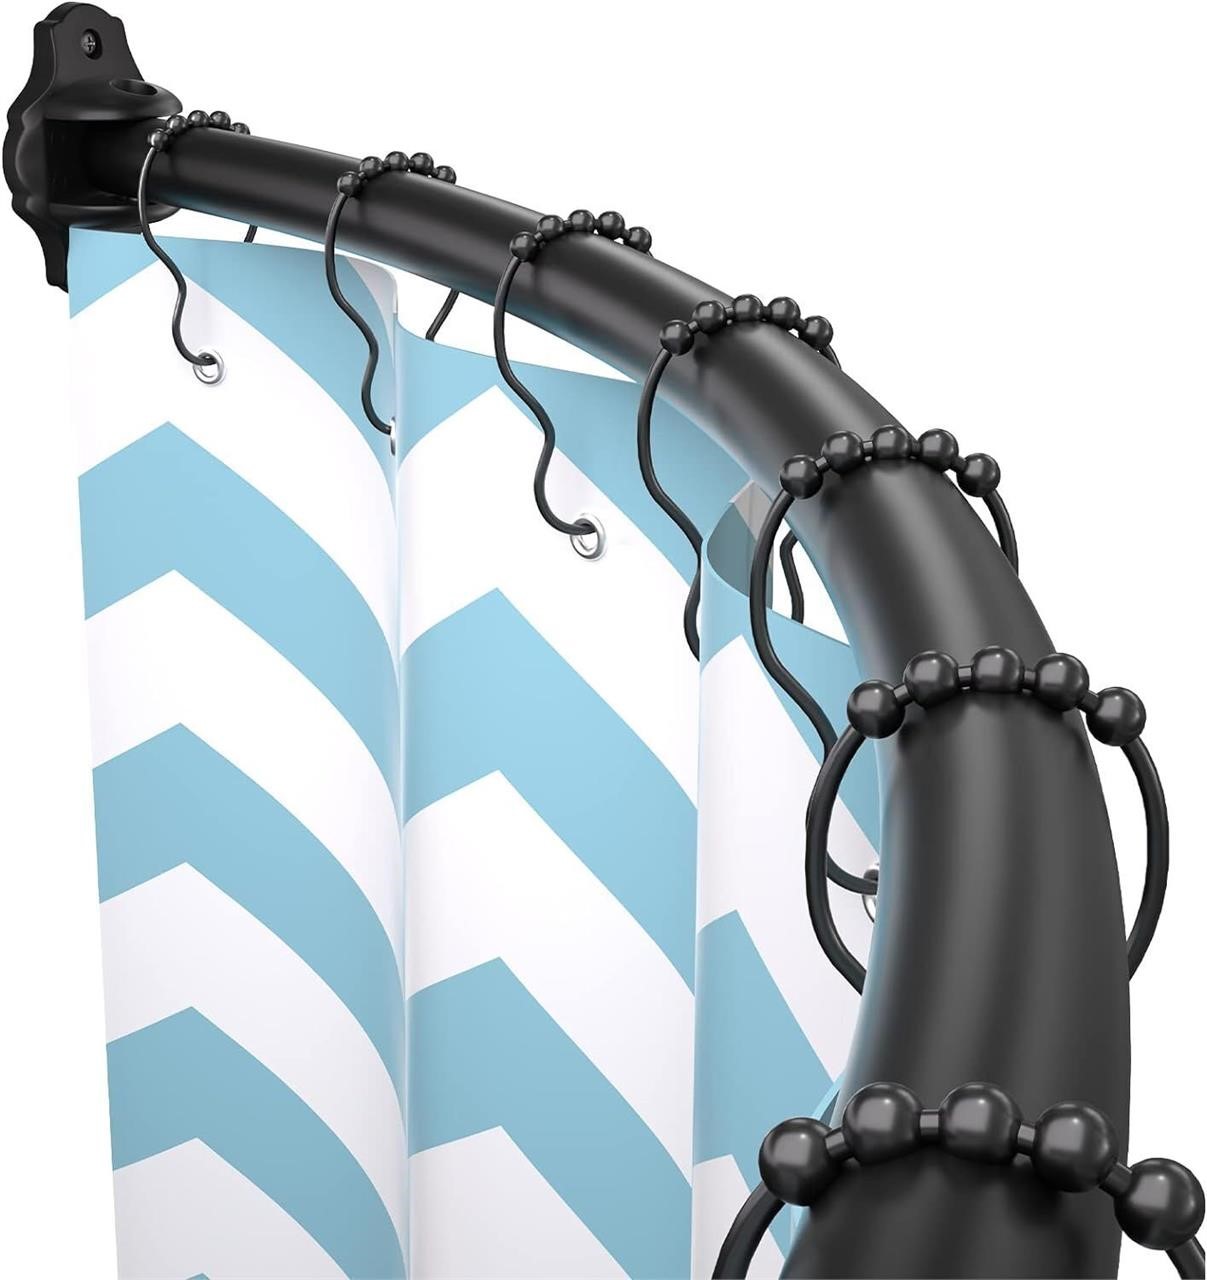 $50 Curved Shower Curtain Rod - 43-72 Inches